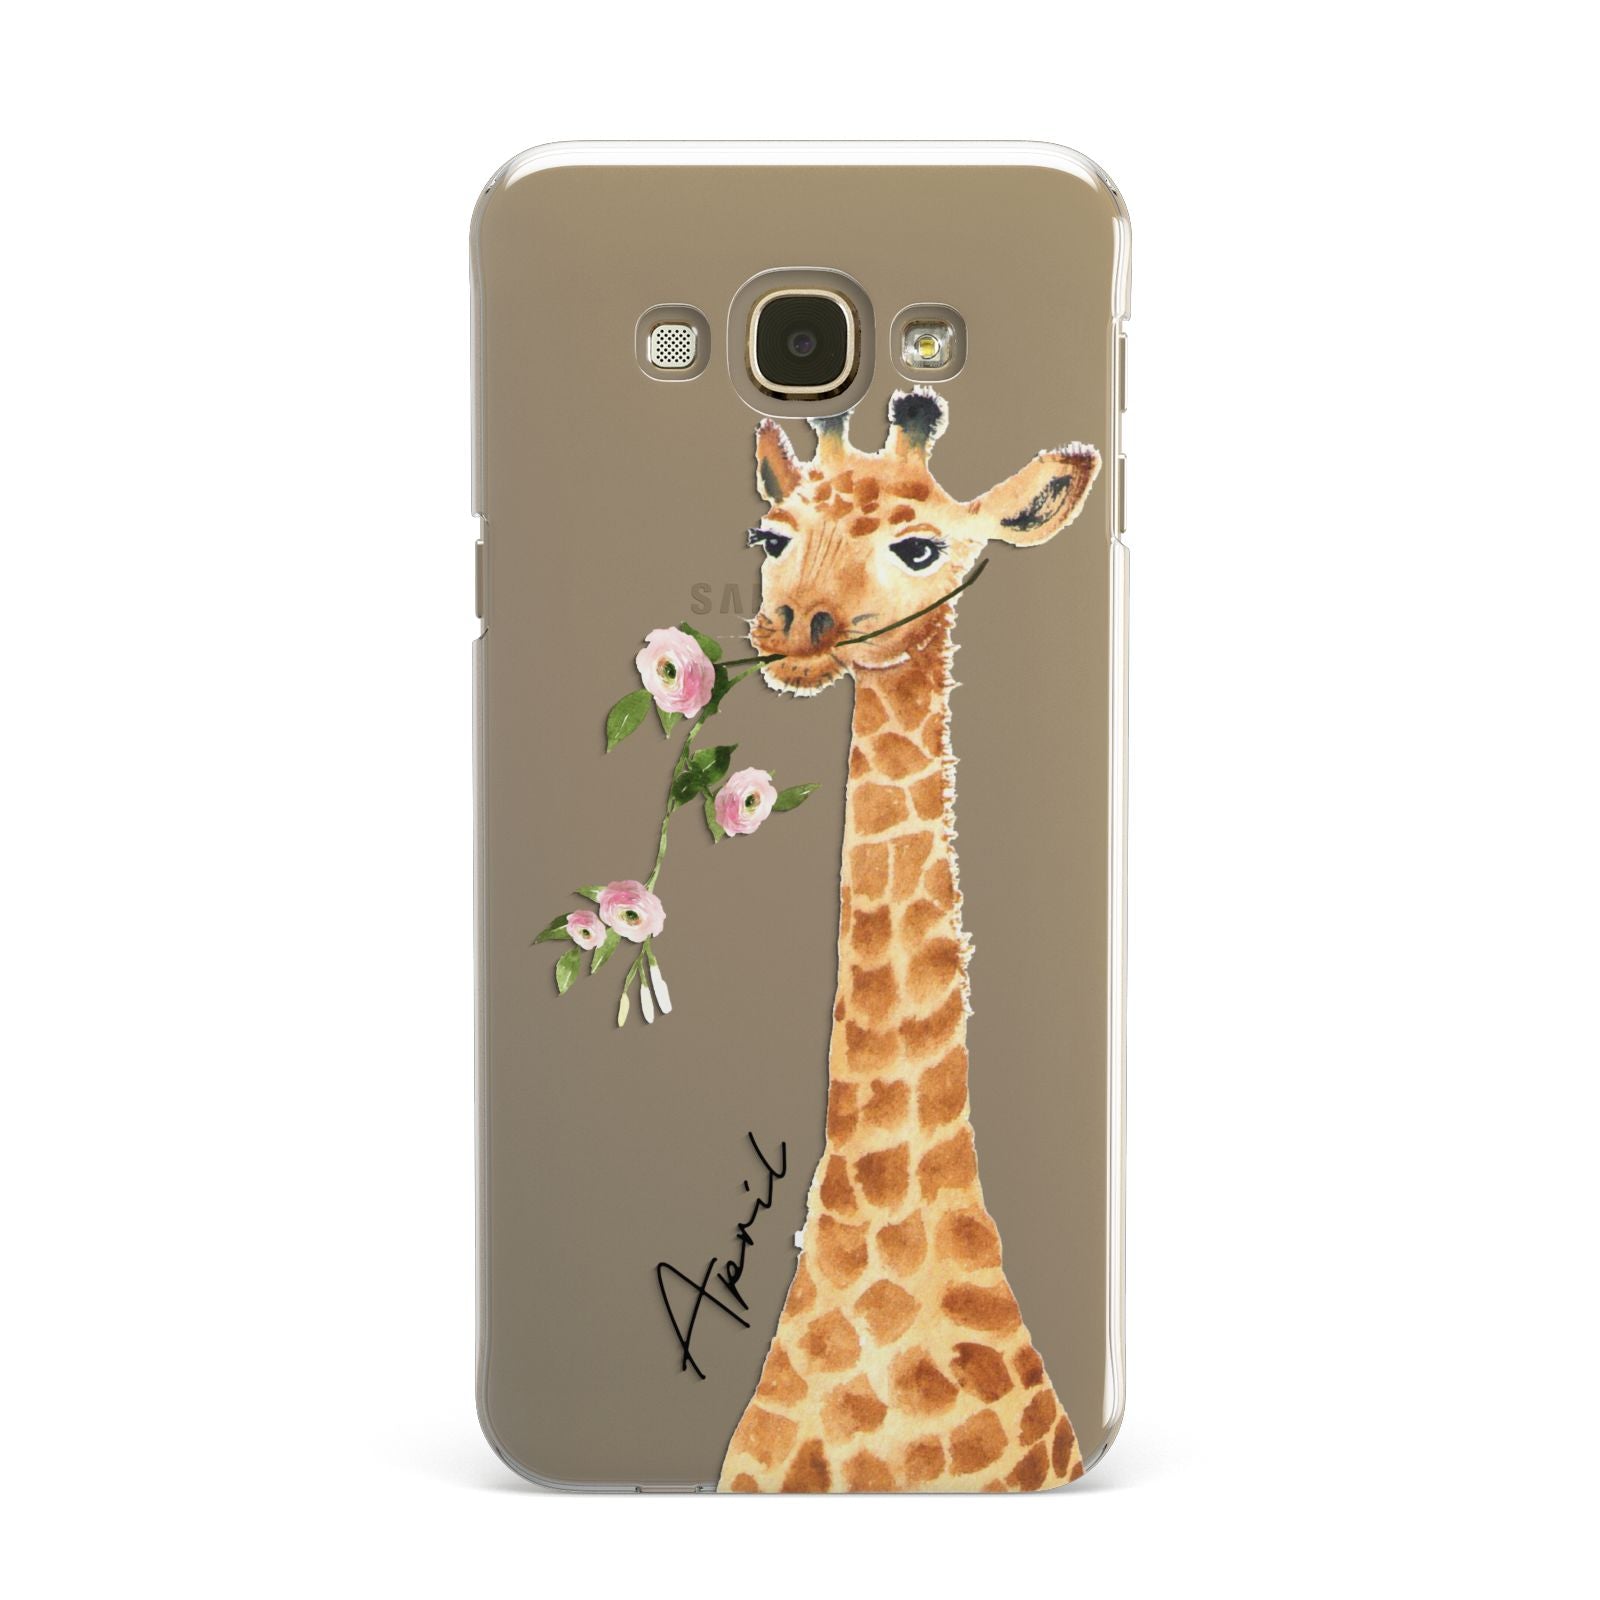 Personalised Giraffe with Name Samsung Galaxy A8 Case